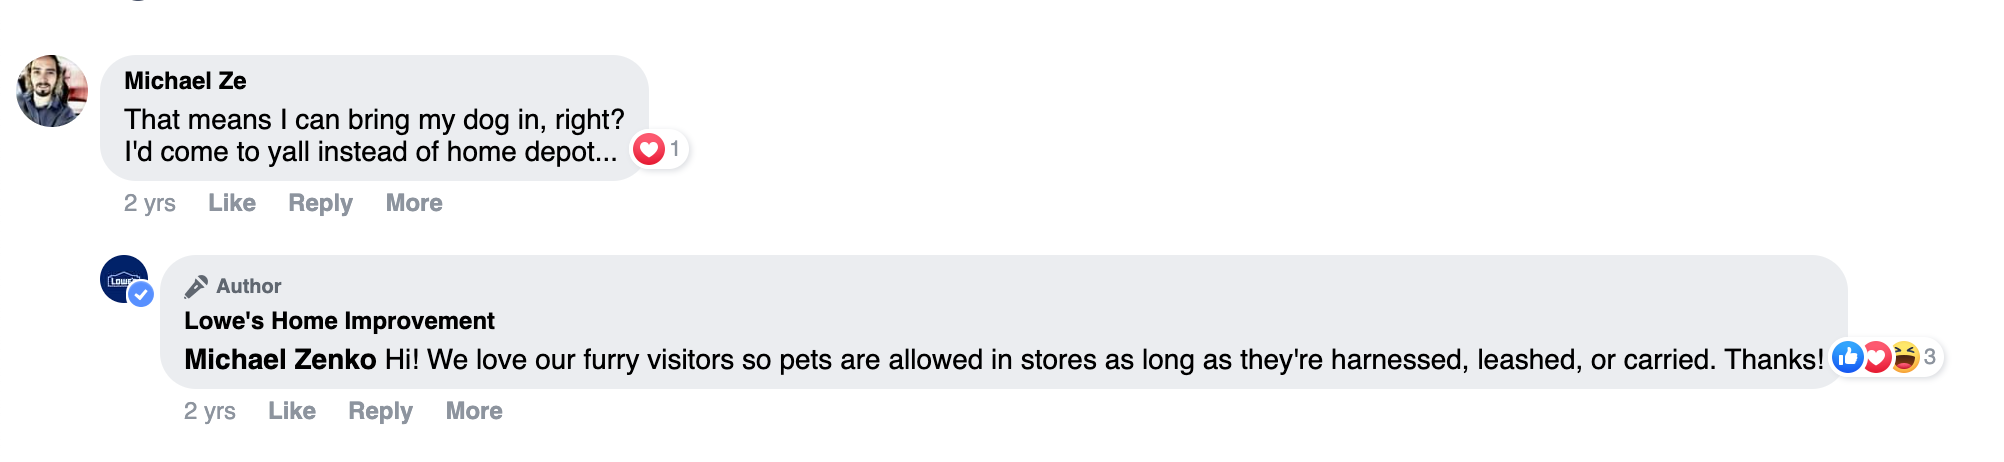 Lowe's social media coordinator confirming that the store is pet-friendly.